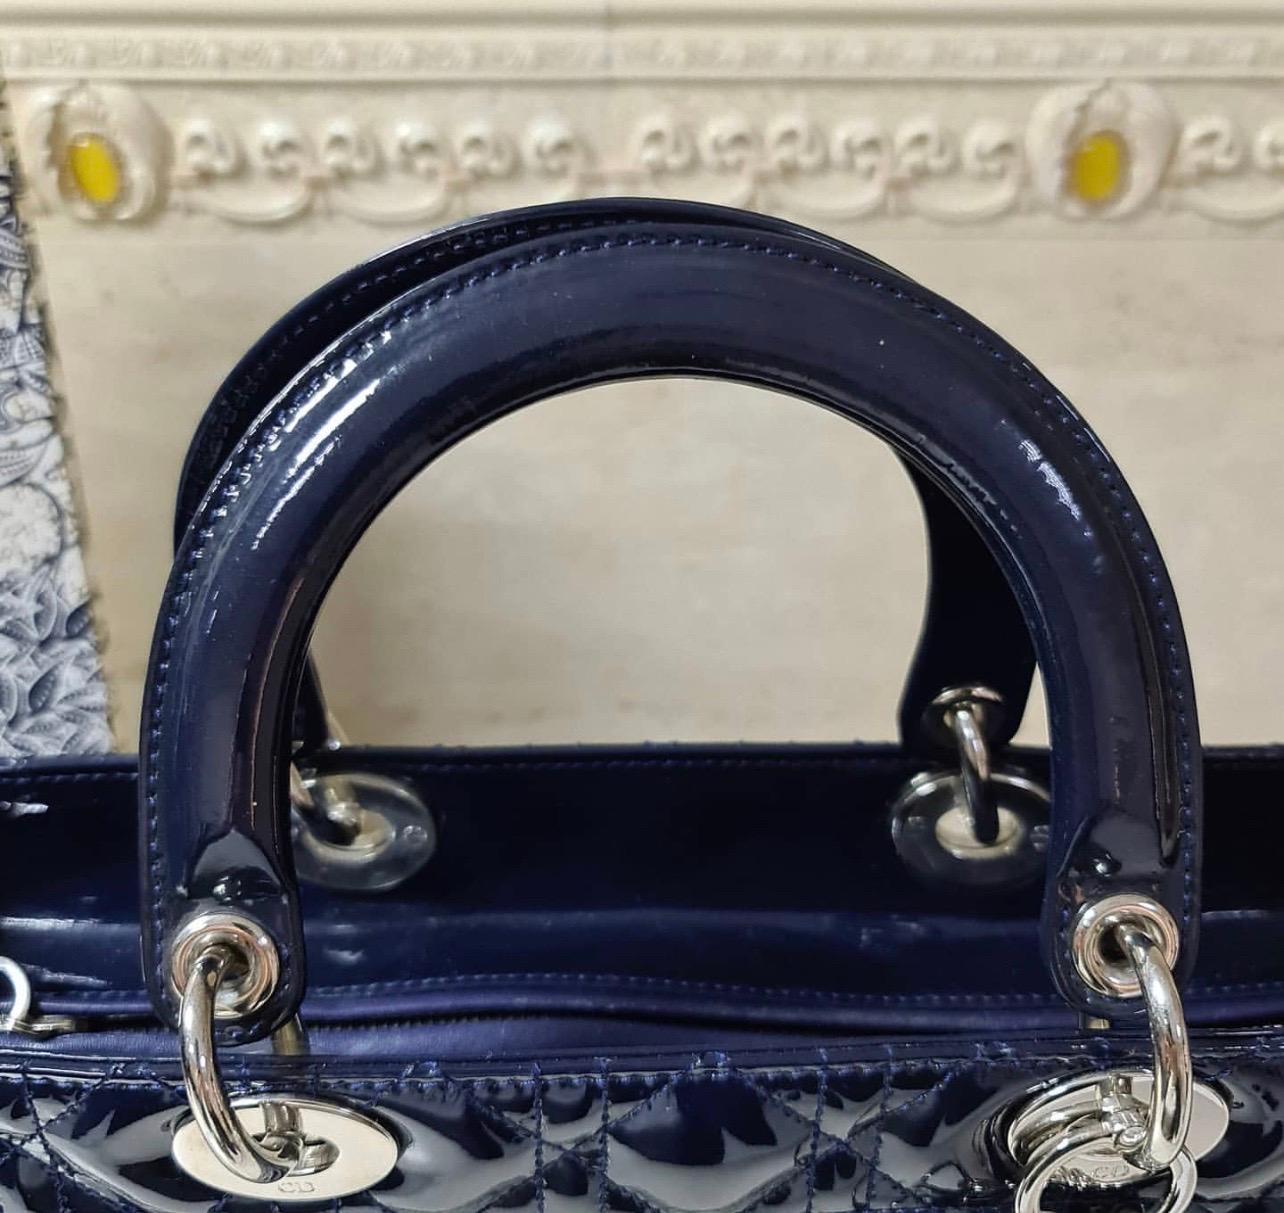 This sophisticated and feminine Lady Dior tote in your hand is apt for the perfect Dior look. Crafted in patent leather, it is accented with quilted pattern and silver-tone hardware. It features signature Dior charms, two round handles, a detachable